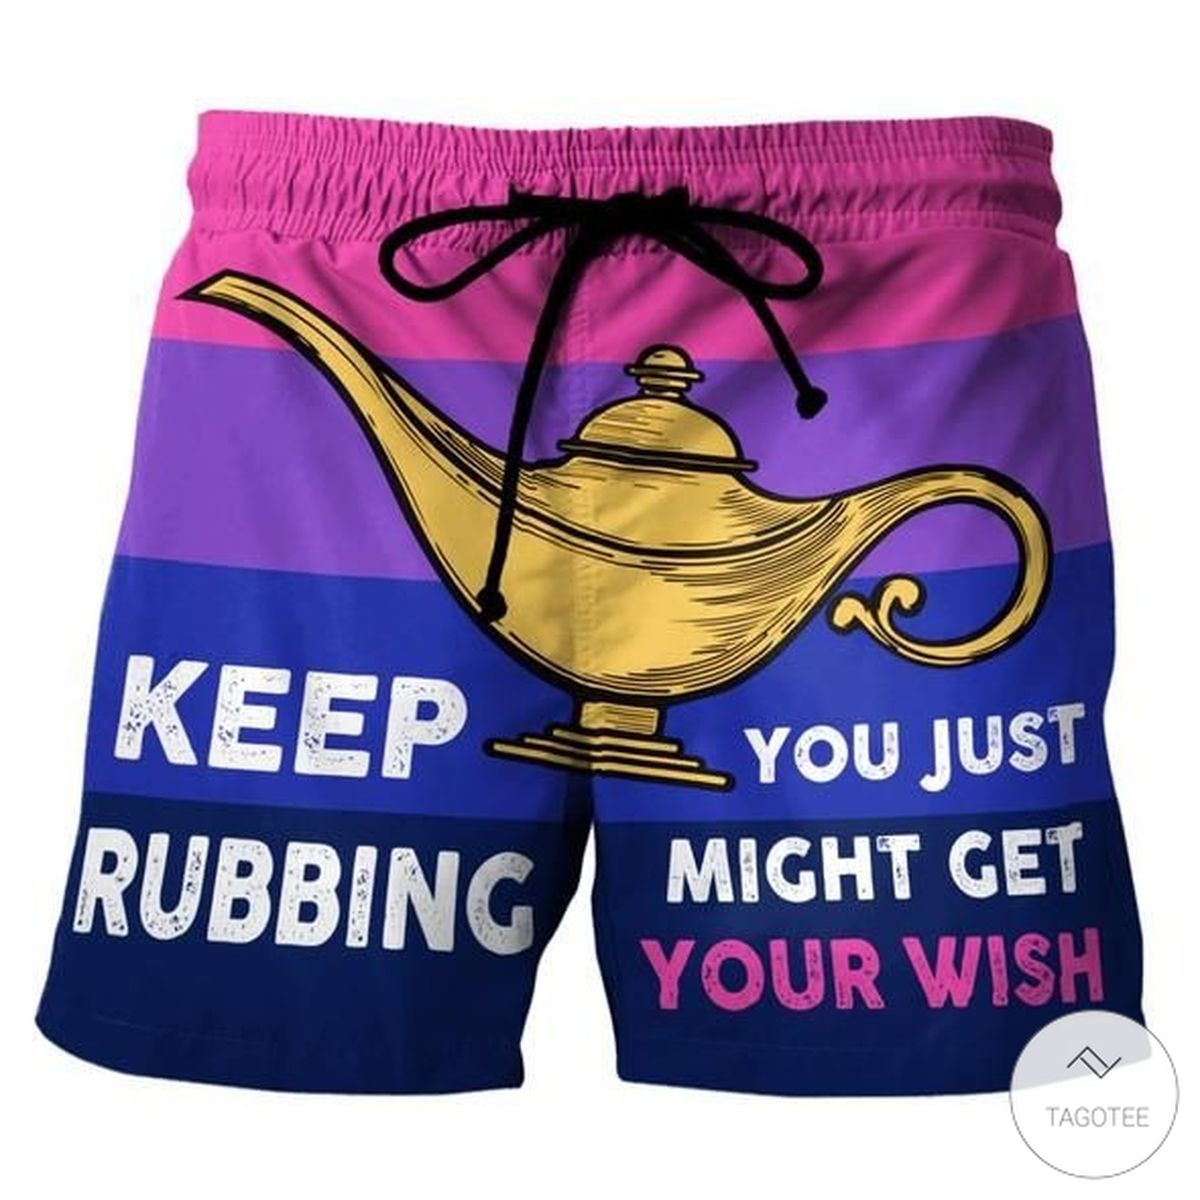 Keep-Rubbing-You-Just-Might-Get-Your-Wish-Beach-Short